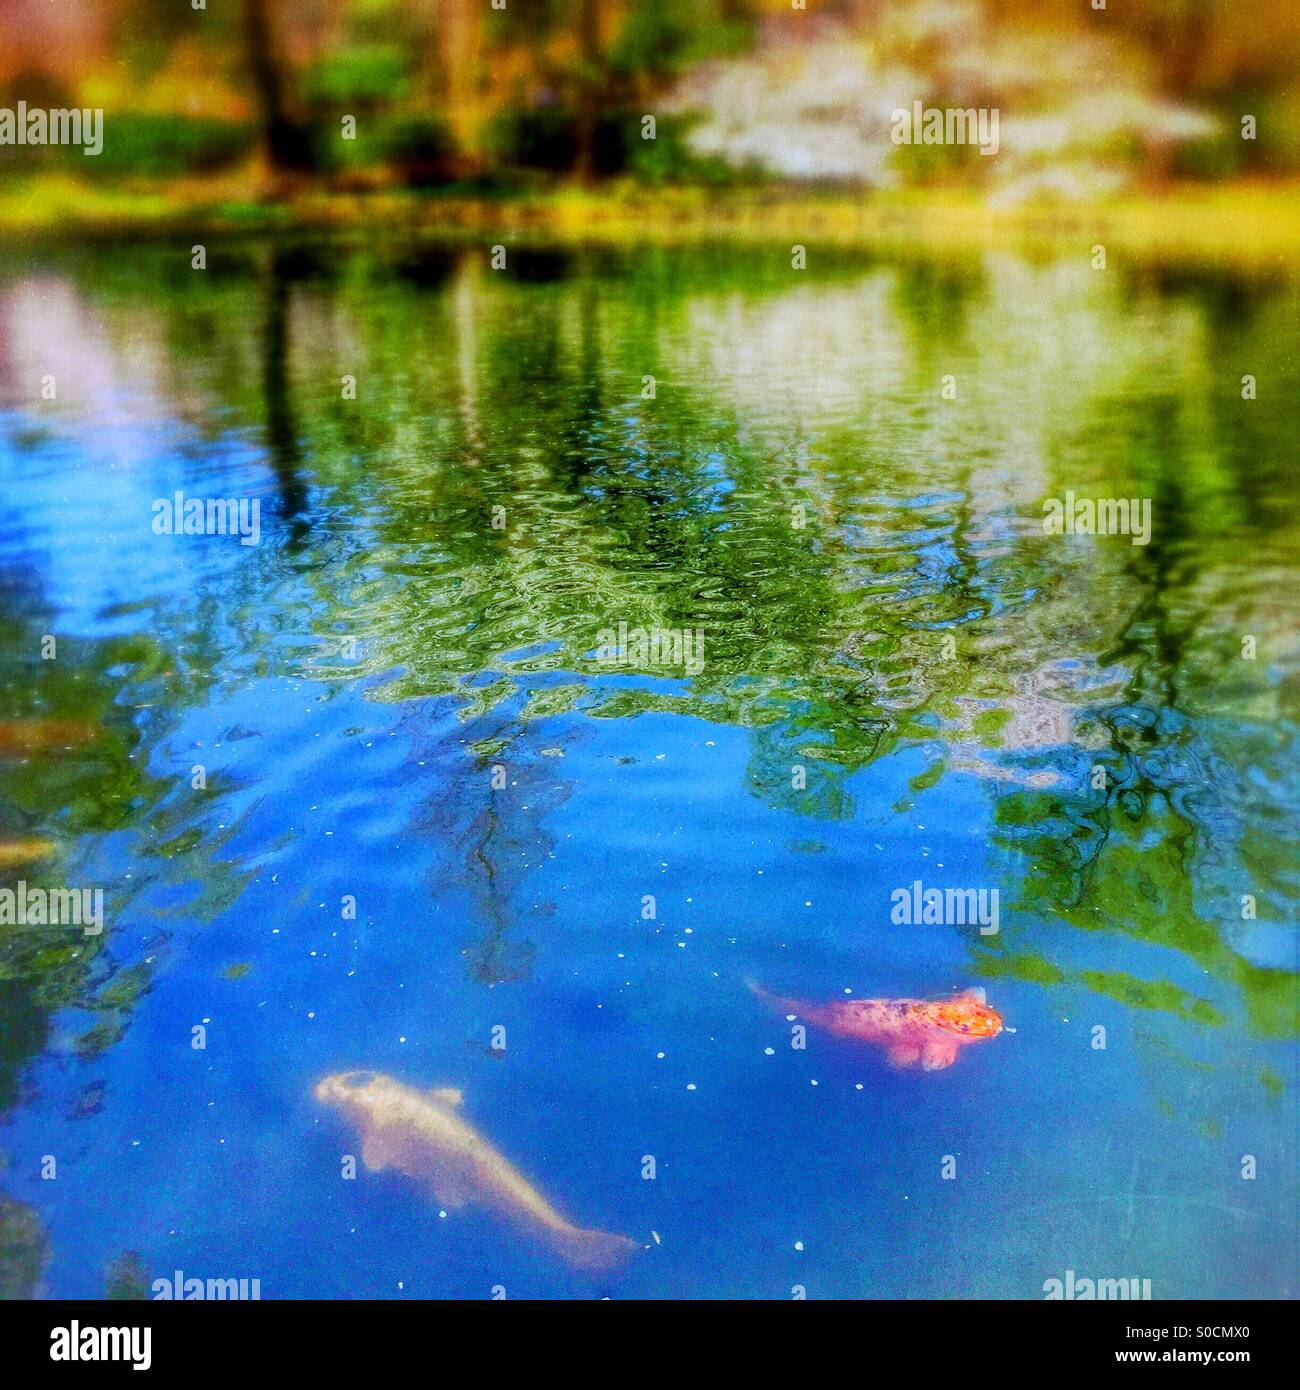 Yellow and orange Japanese koi fish swimming in pond with cherry blossom petals scattered on water surface. Willow and cherry trees reflected on water. Blur and vintage paper texture overlay. Stock Photo